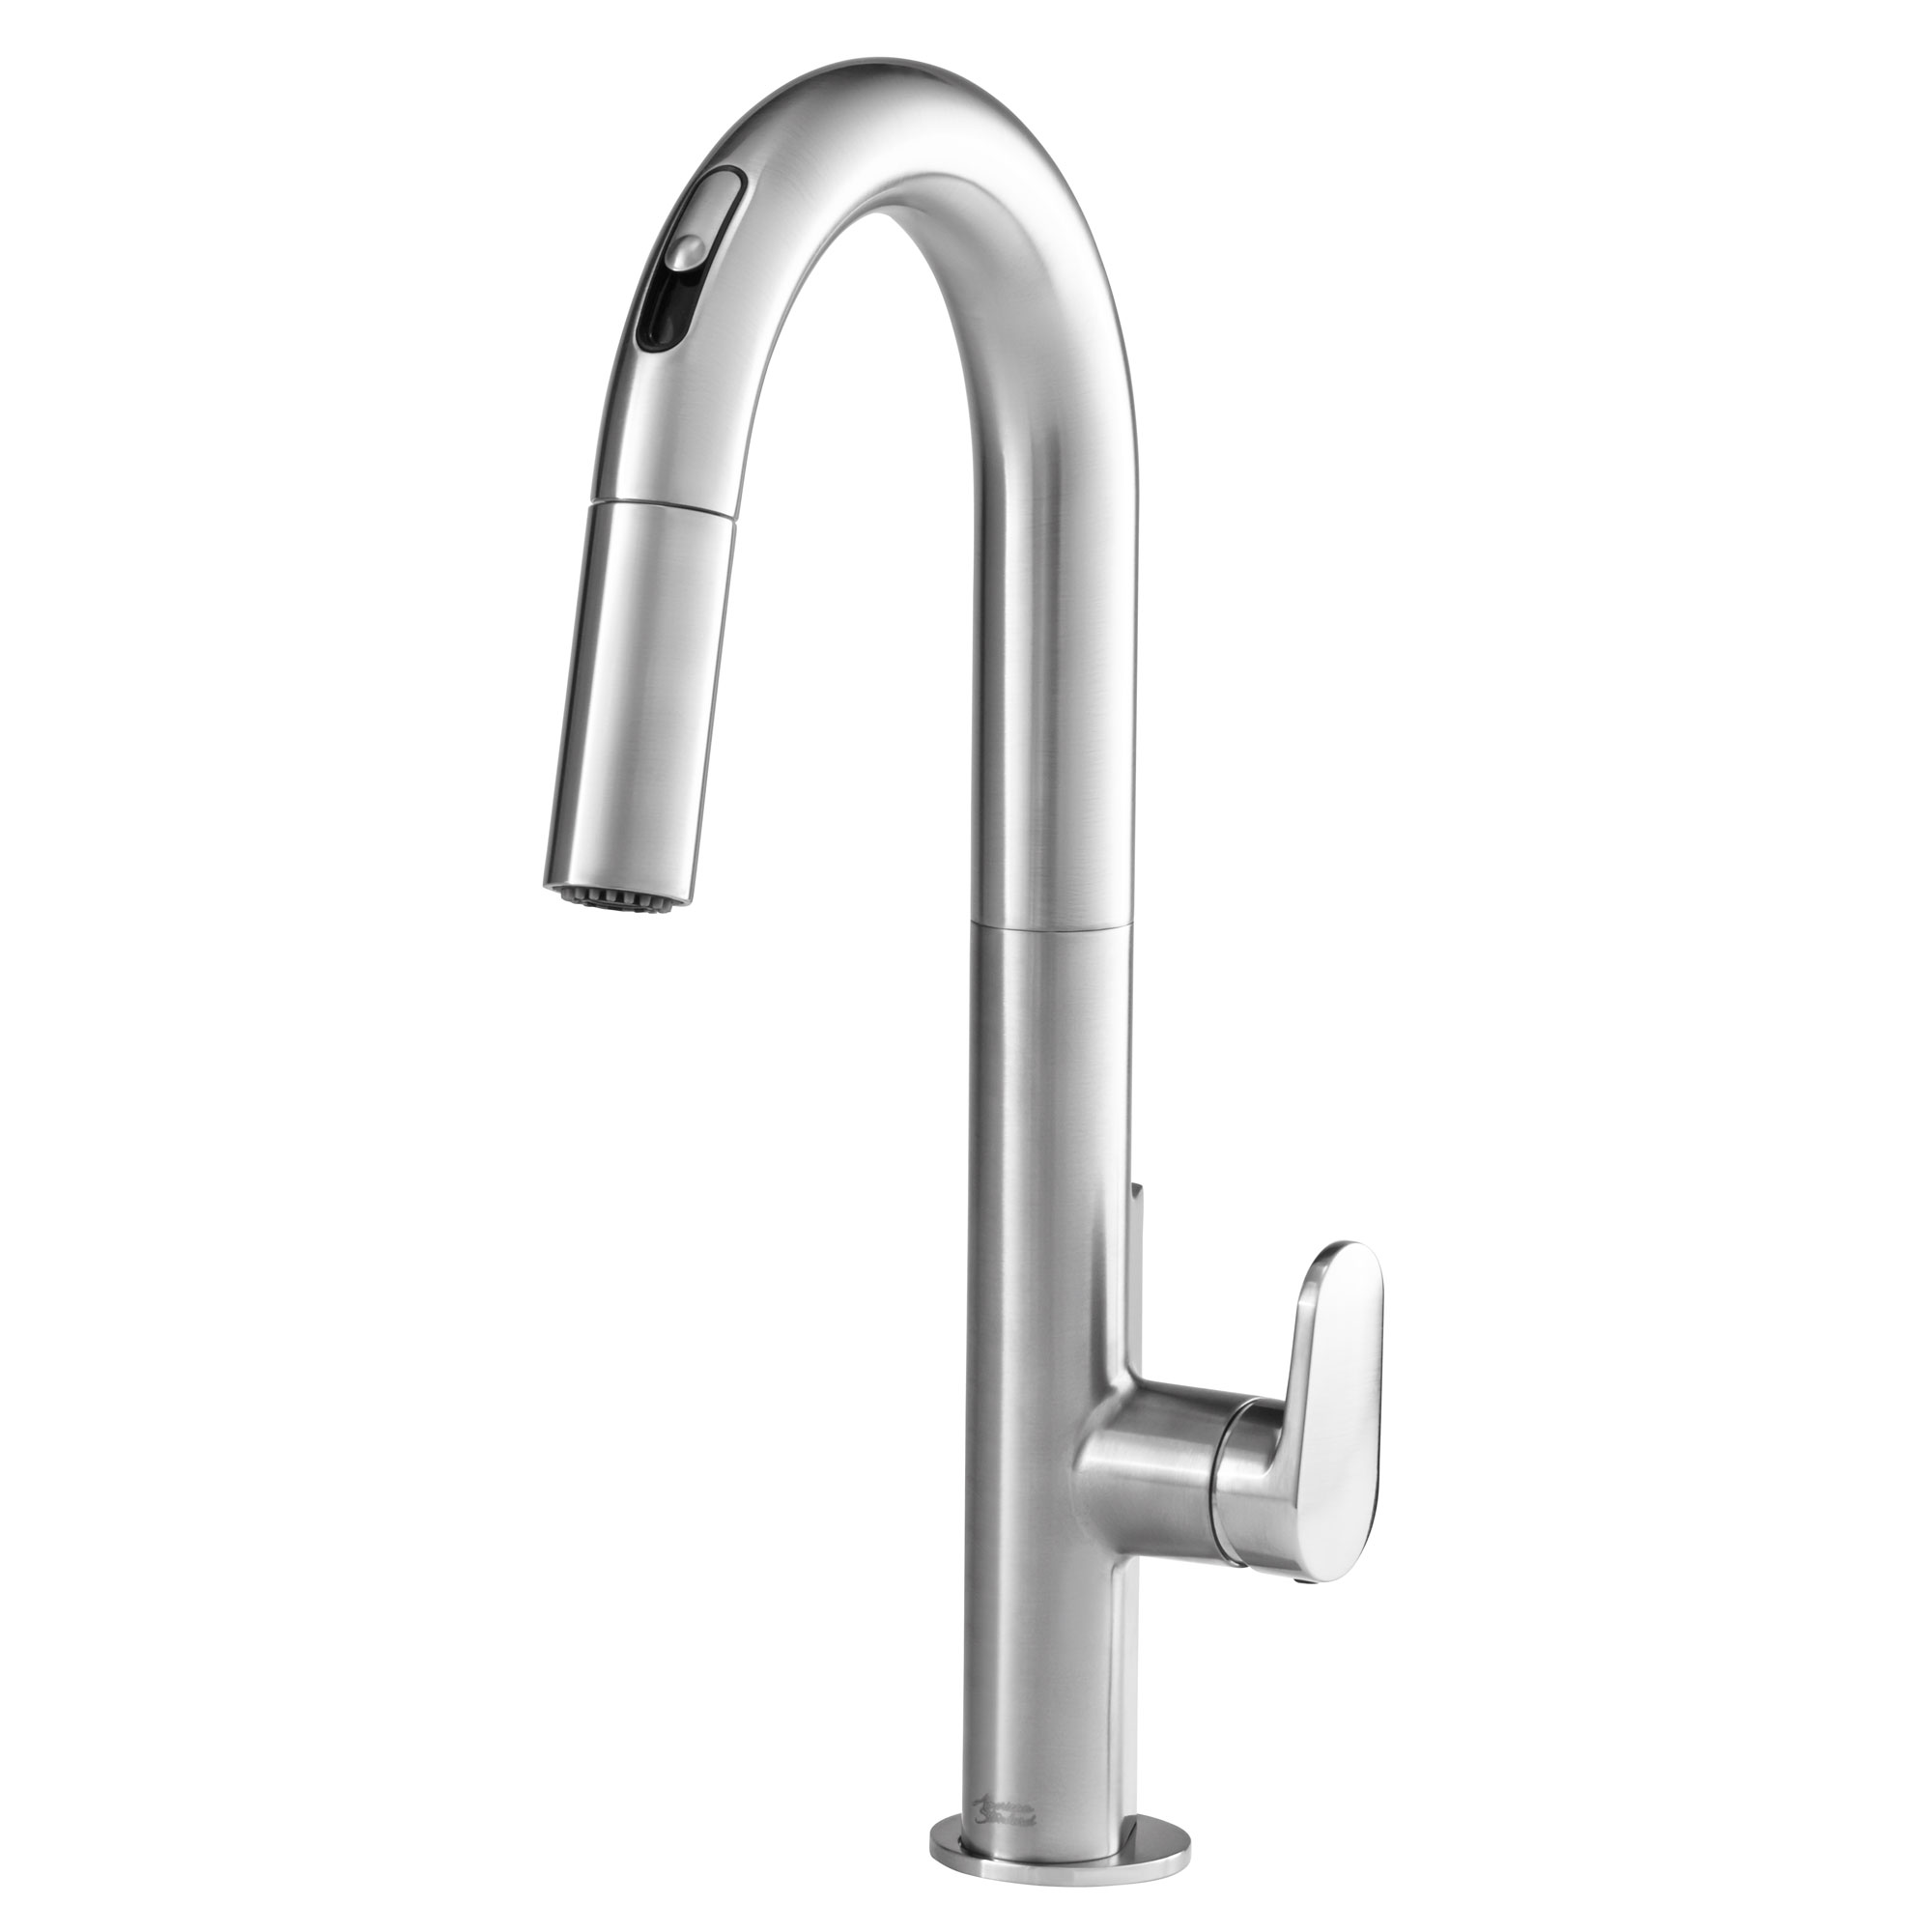 Beale® Touchless Single-Handle Pull-Down Dual Spray Kitchen Faucet 1.5 gpm/5.7 L/min